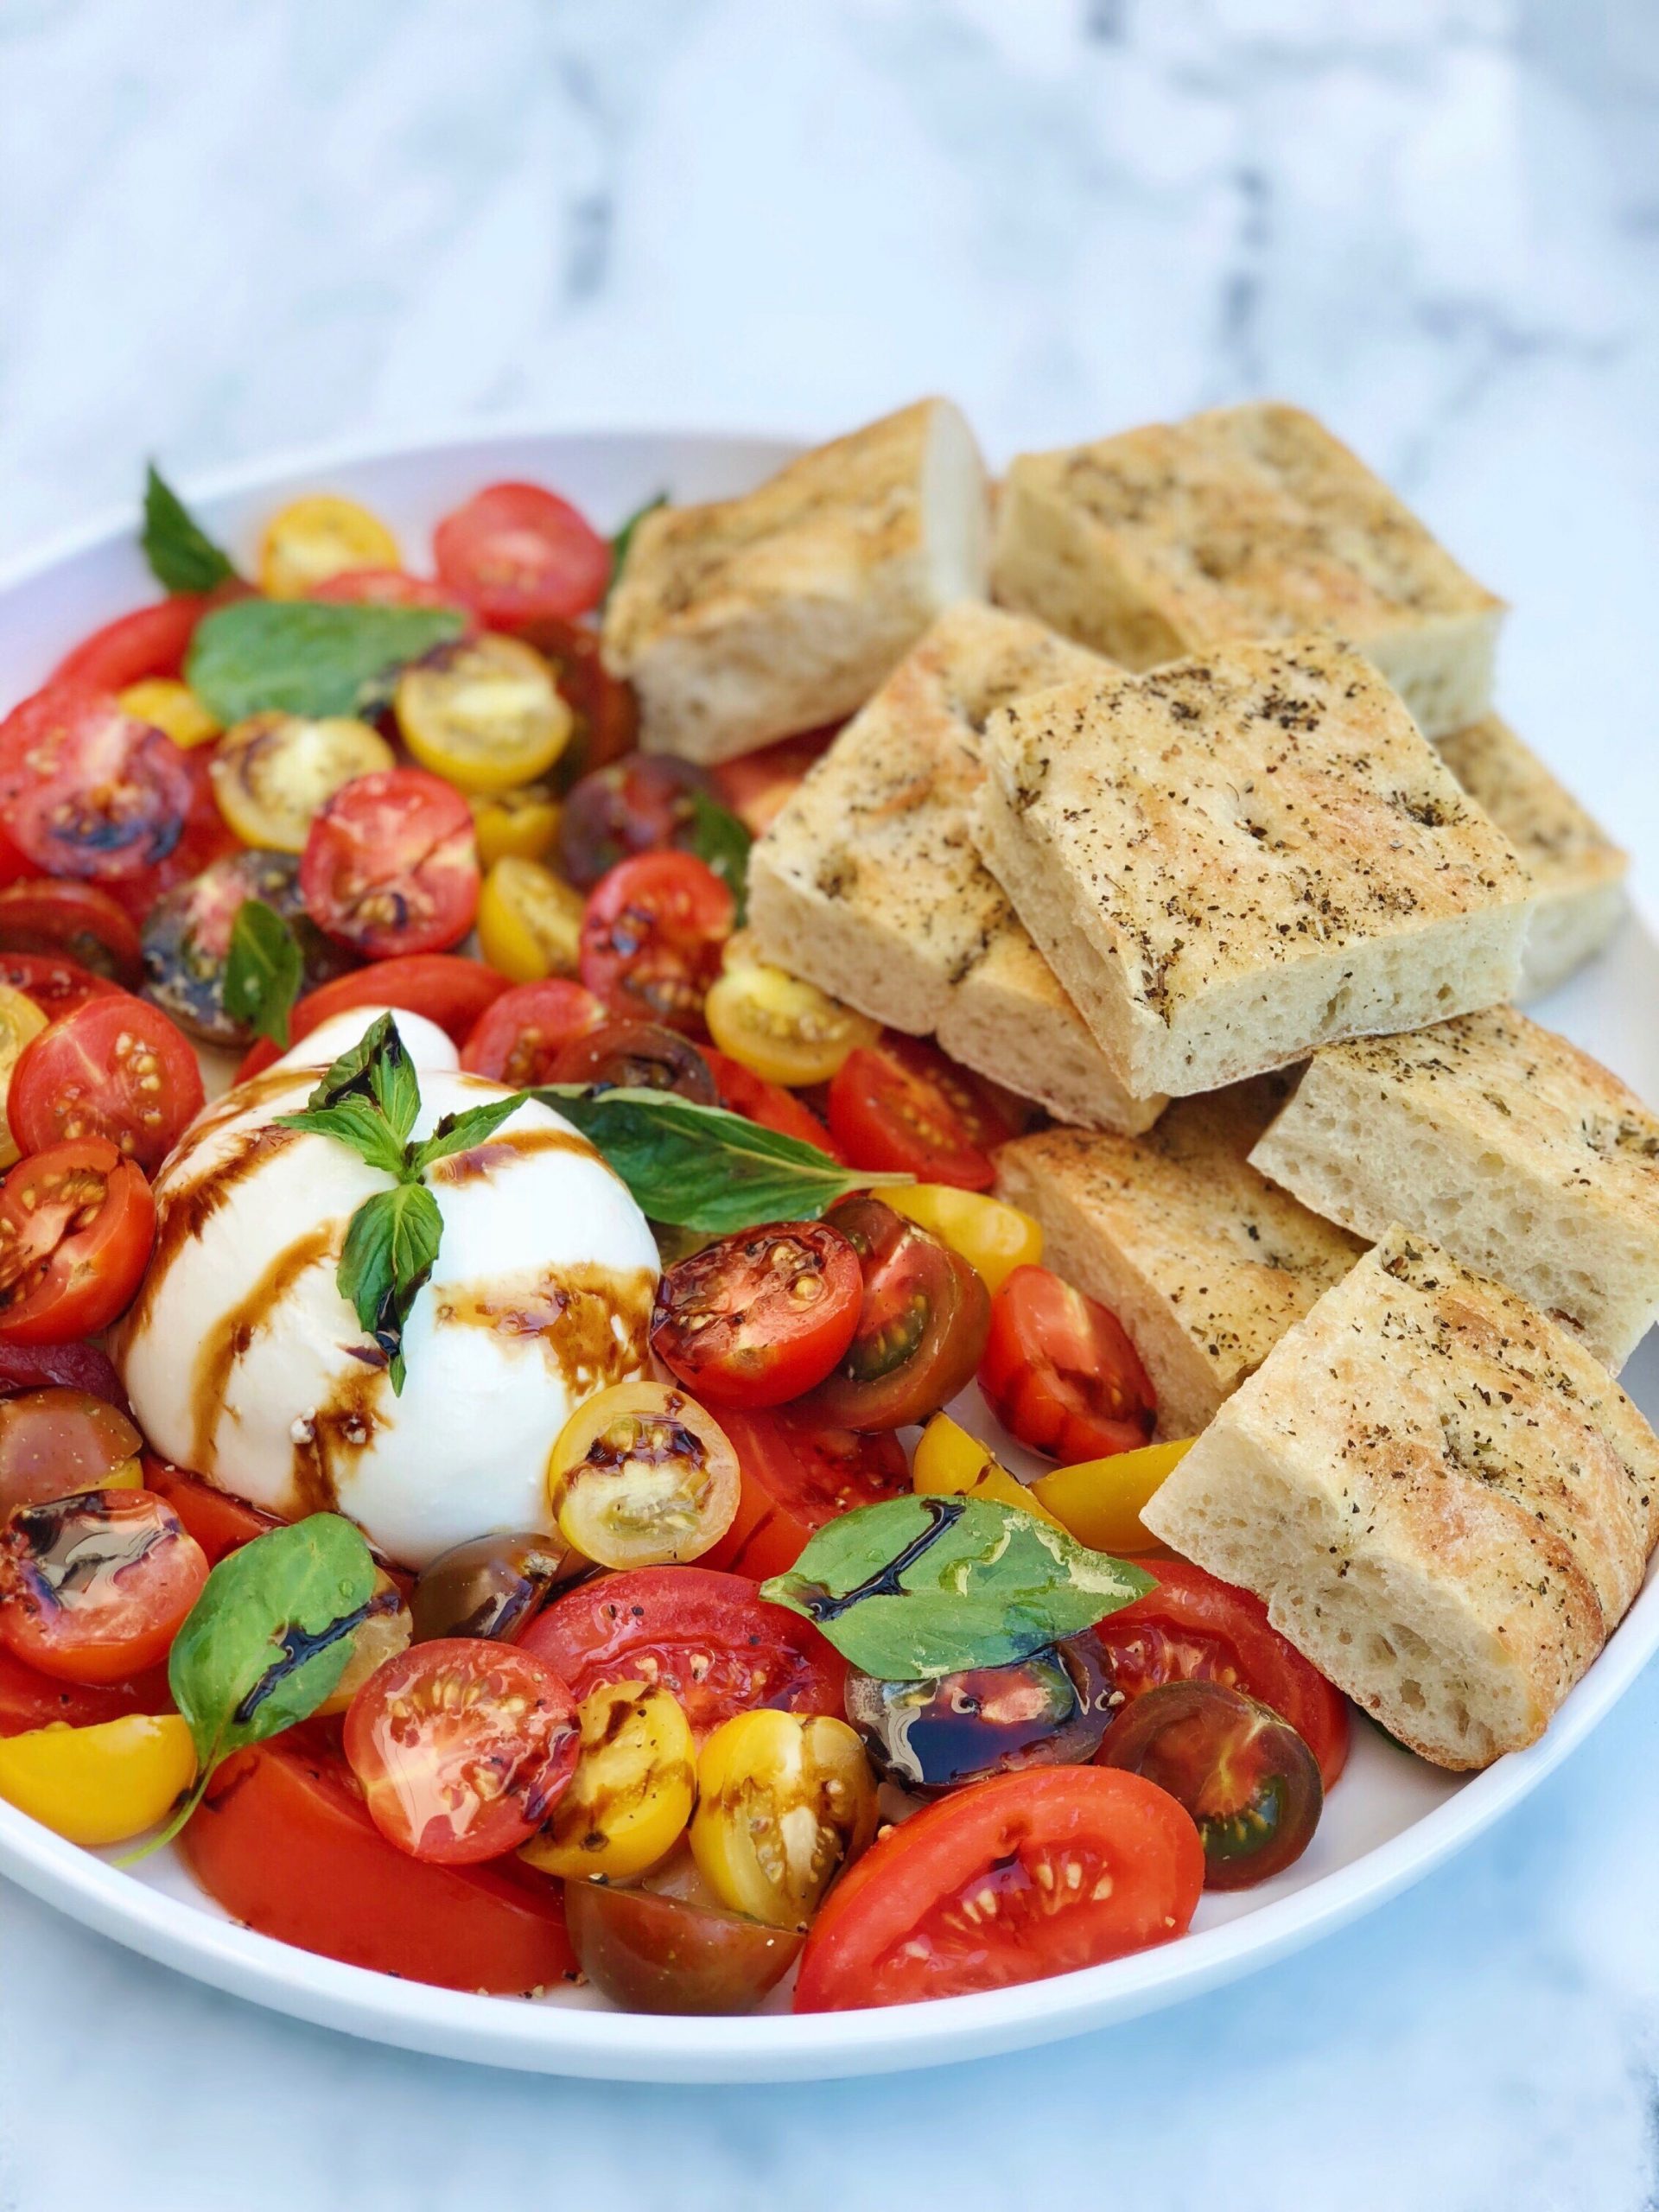 Dish of Burrata and Tomato Salad with Herbed Focaccia